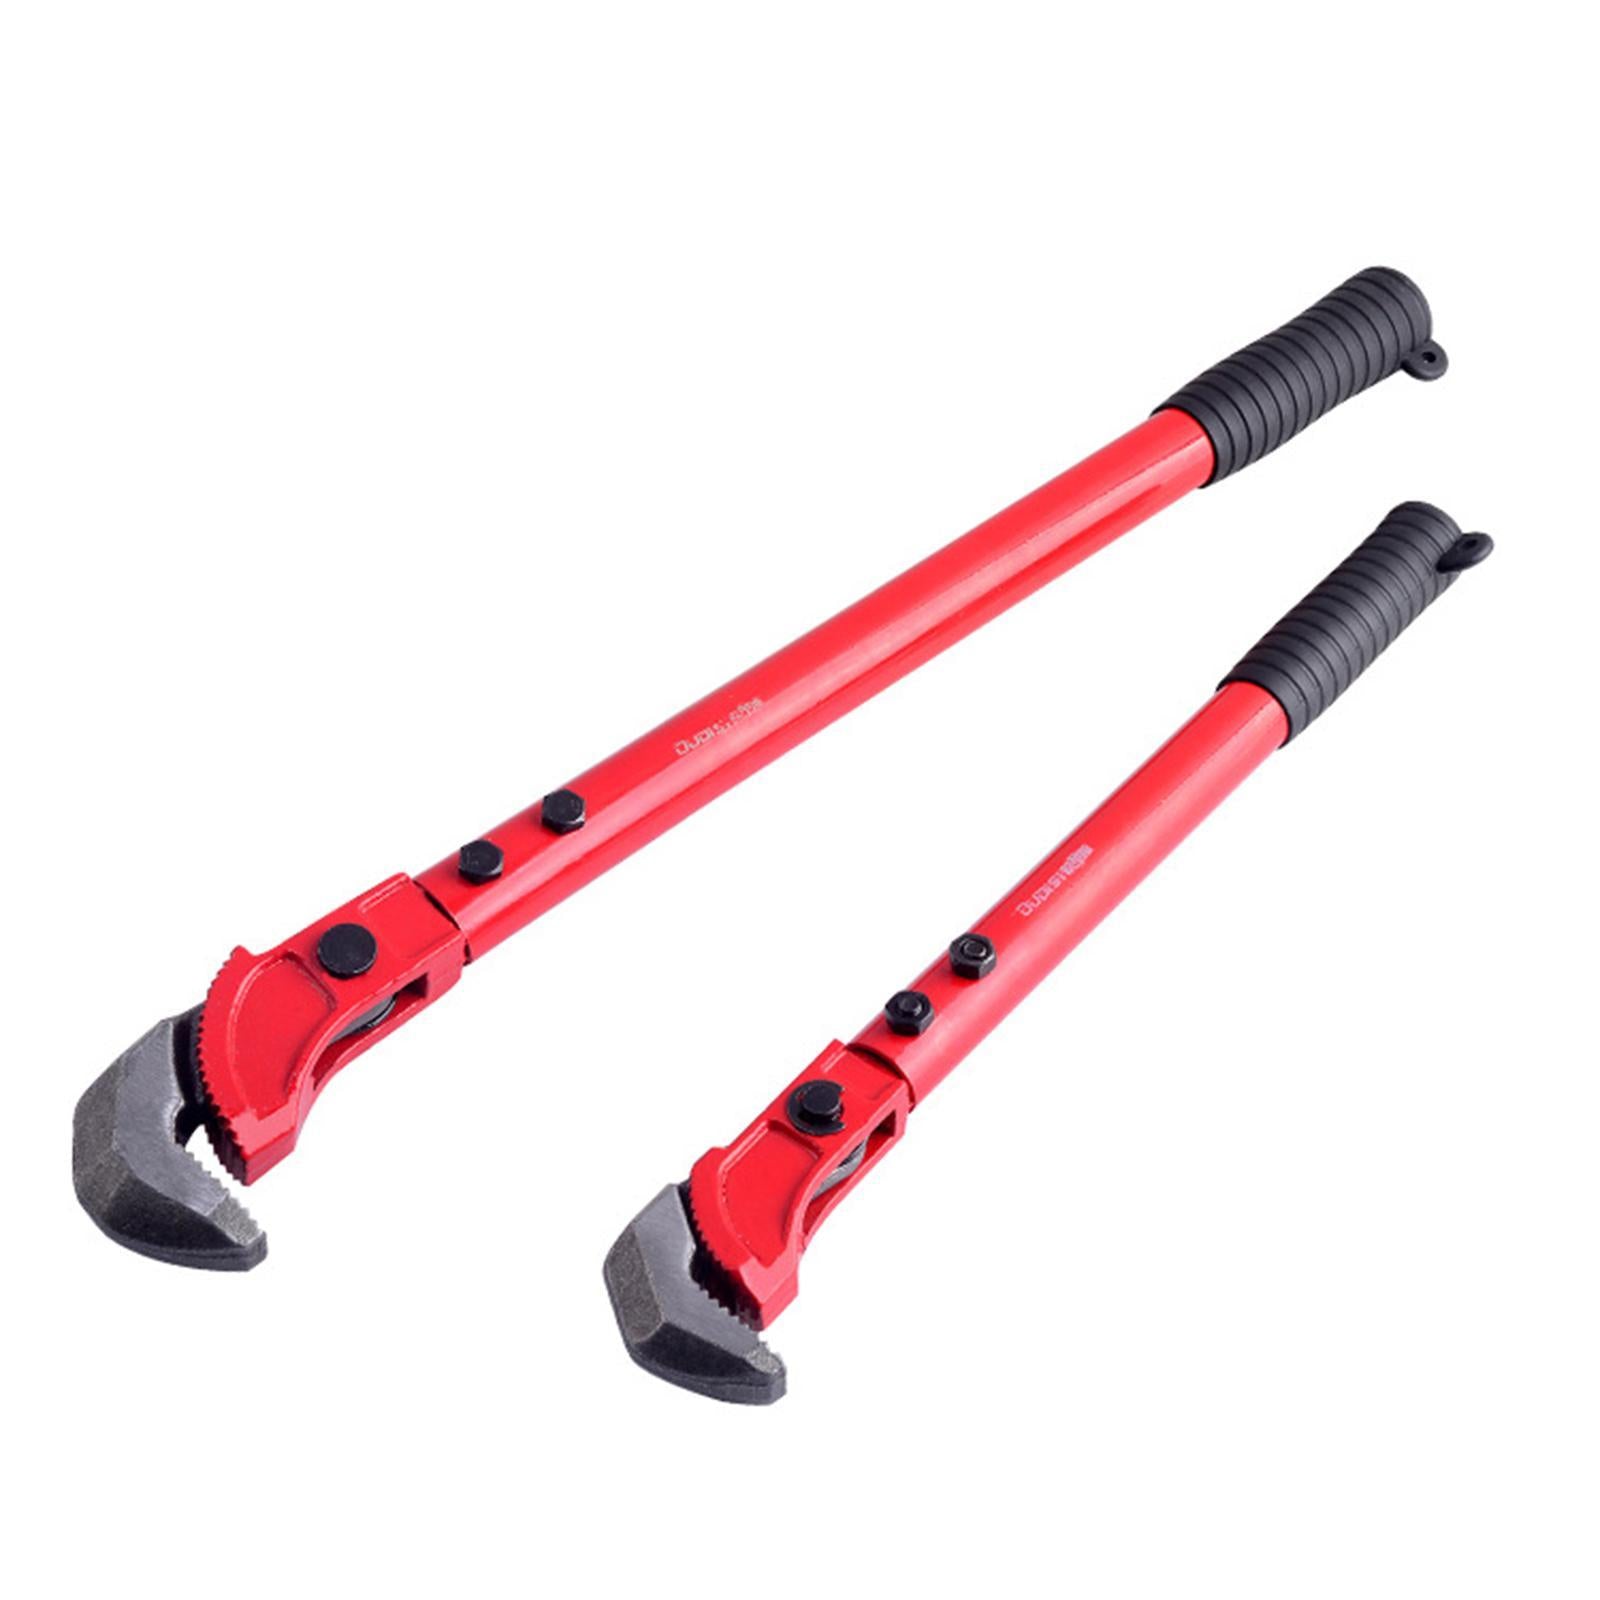 Portable Adjustable Wrench Heavy Duty Grip Spanner Hand Tool for Pipe 24inch